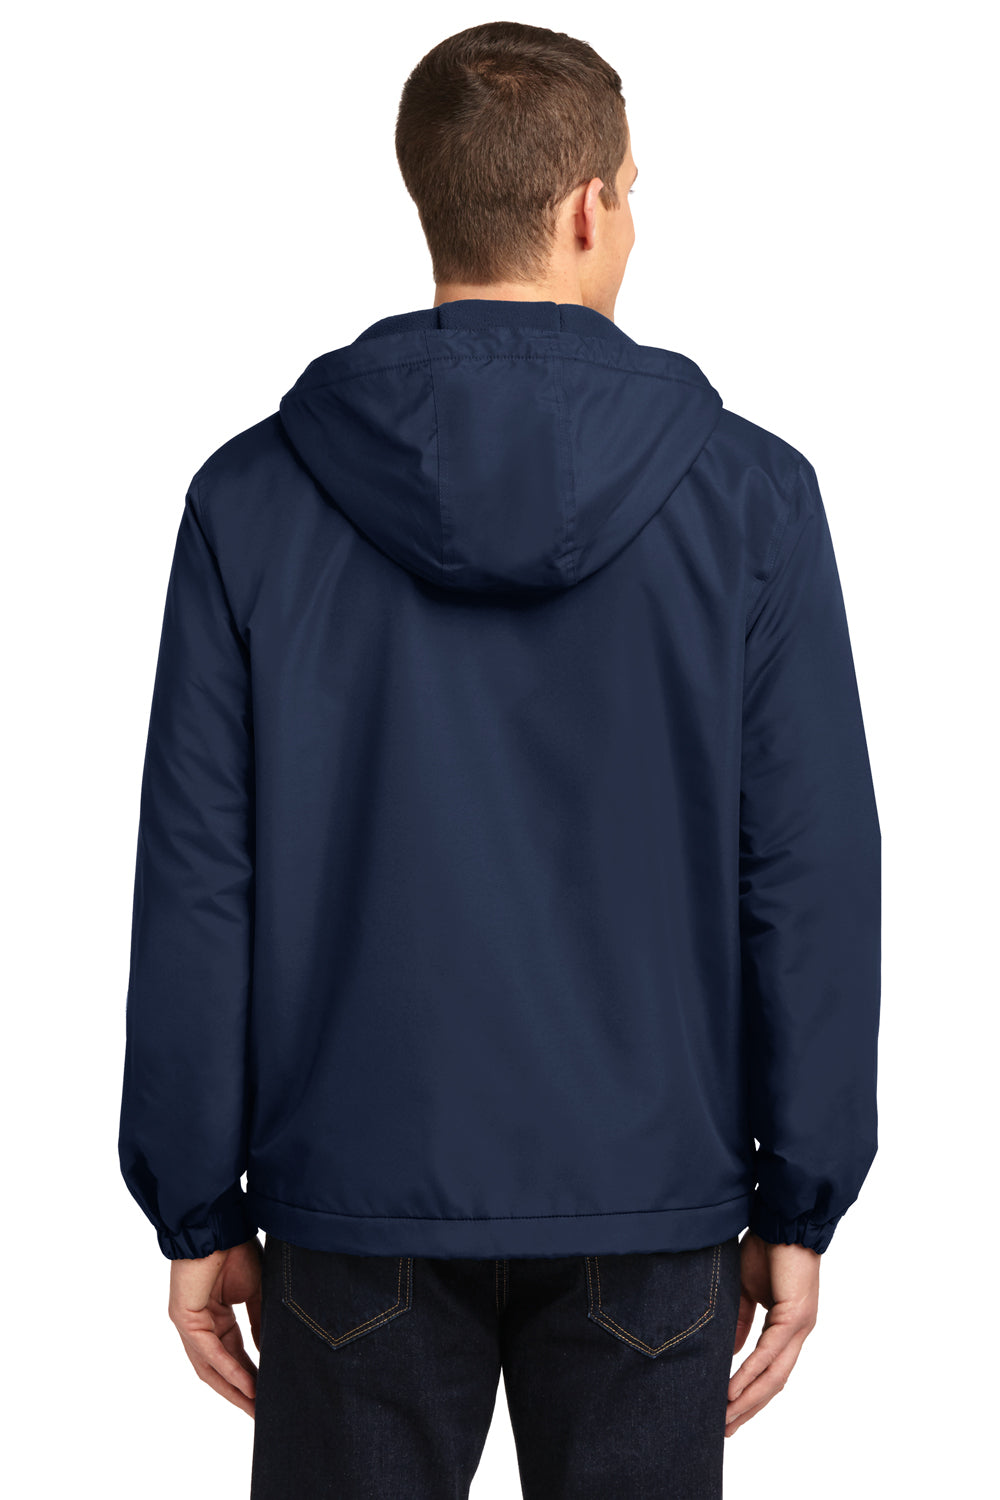 Port Authority J327 Mens Charger Wind & Water Resistant Full Zip Hooded Jacket Navy Blue Back